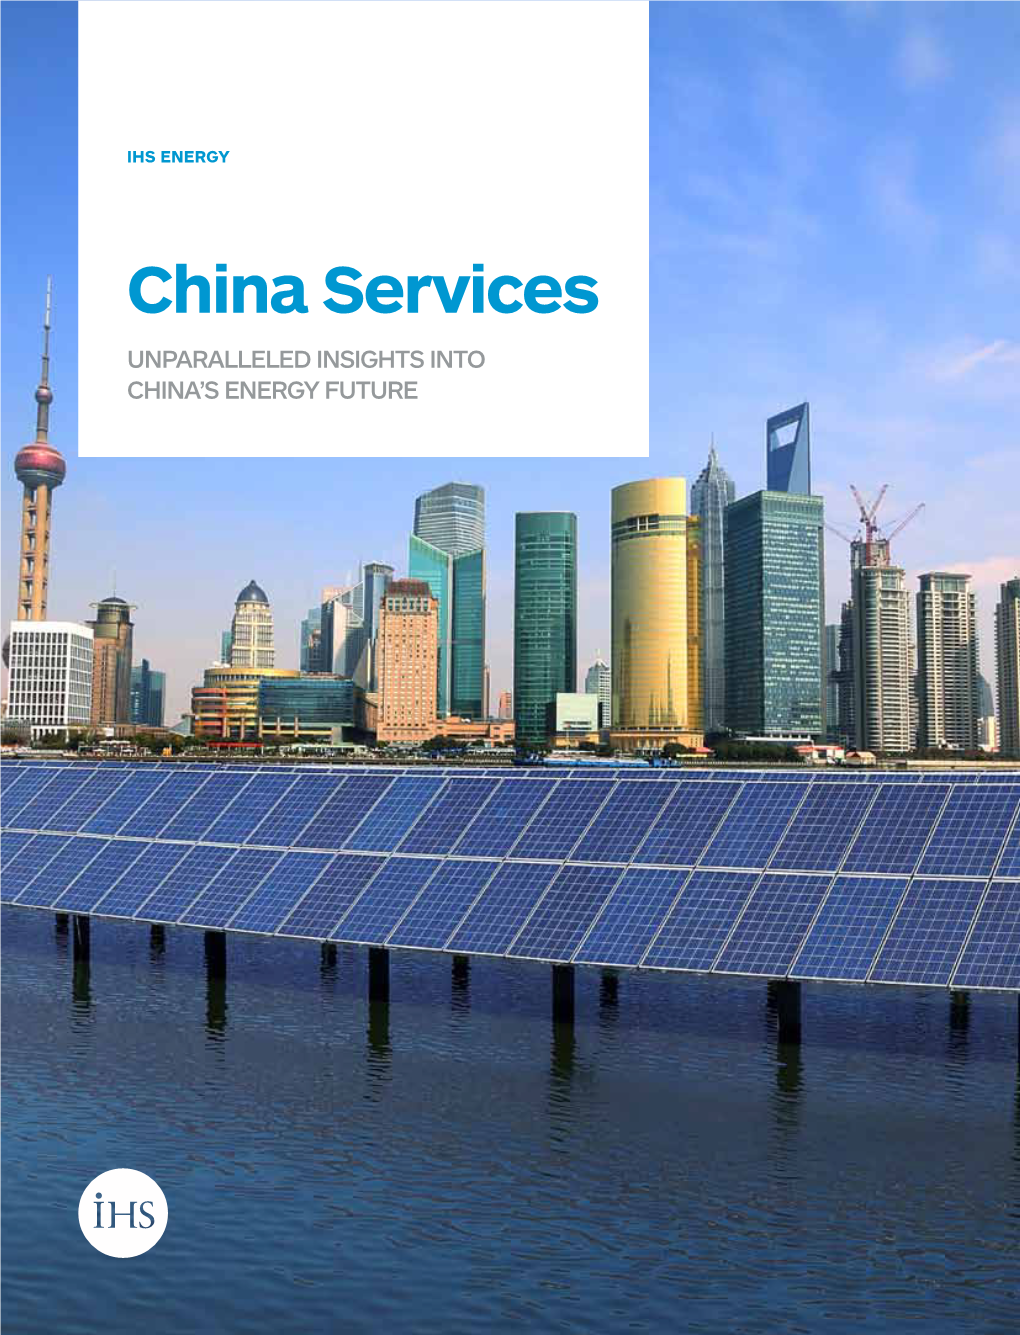 China Services UNPARALLELED INSIGHTS INTO CHINA’S ENERGY FUTURE